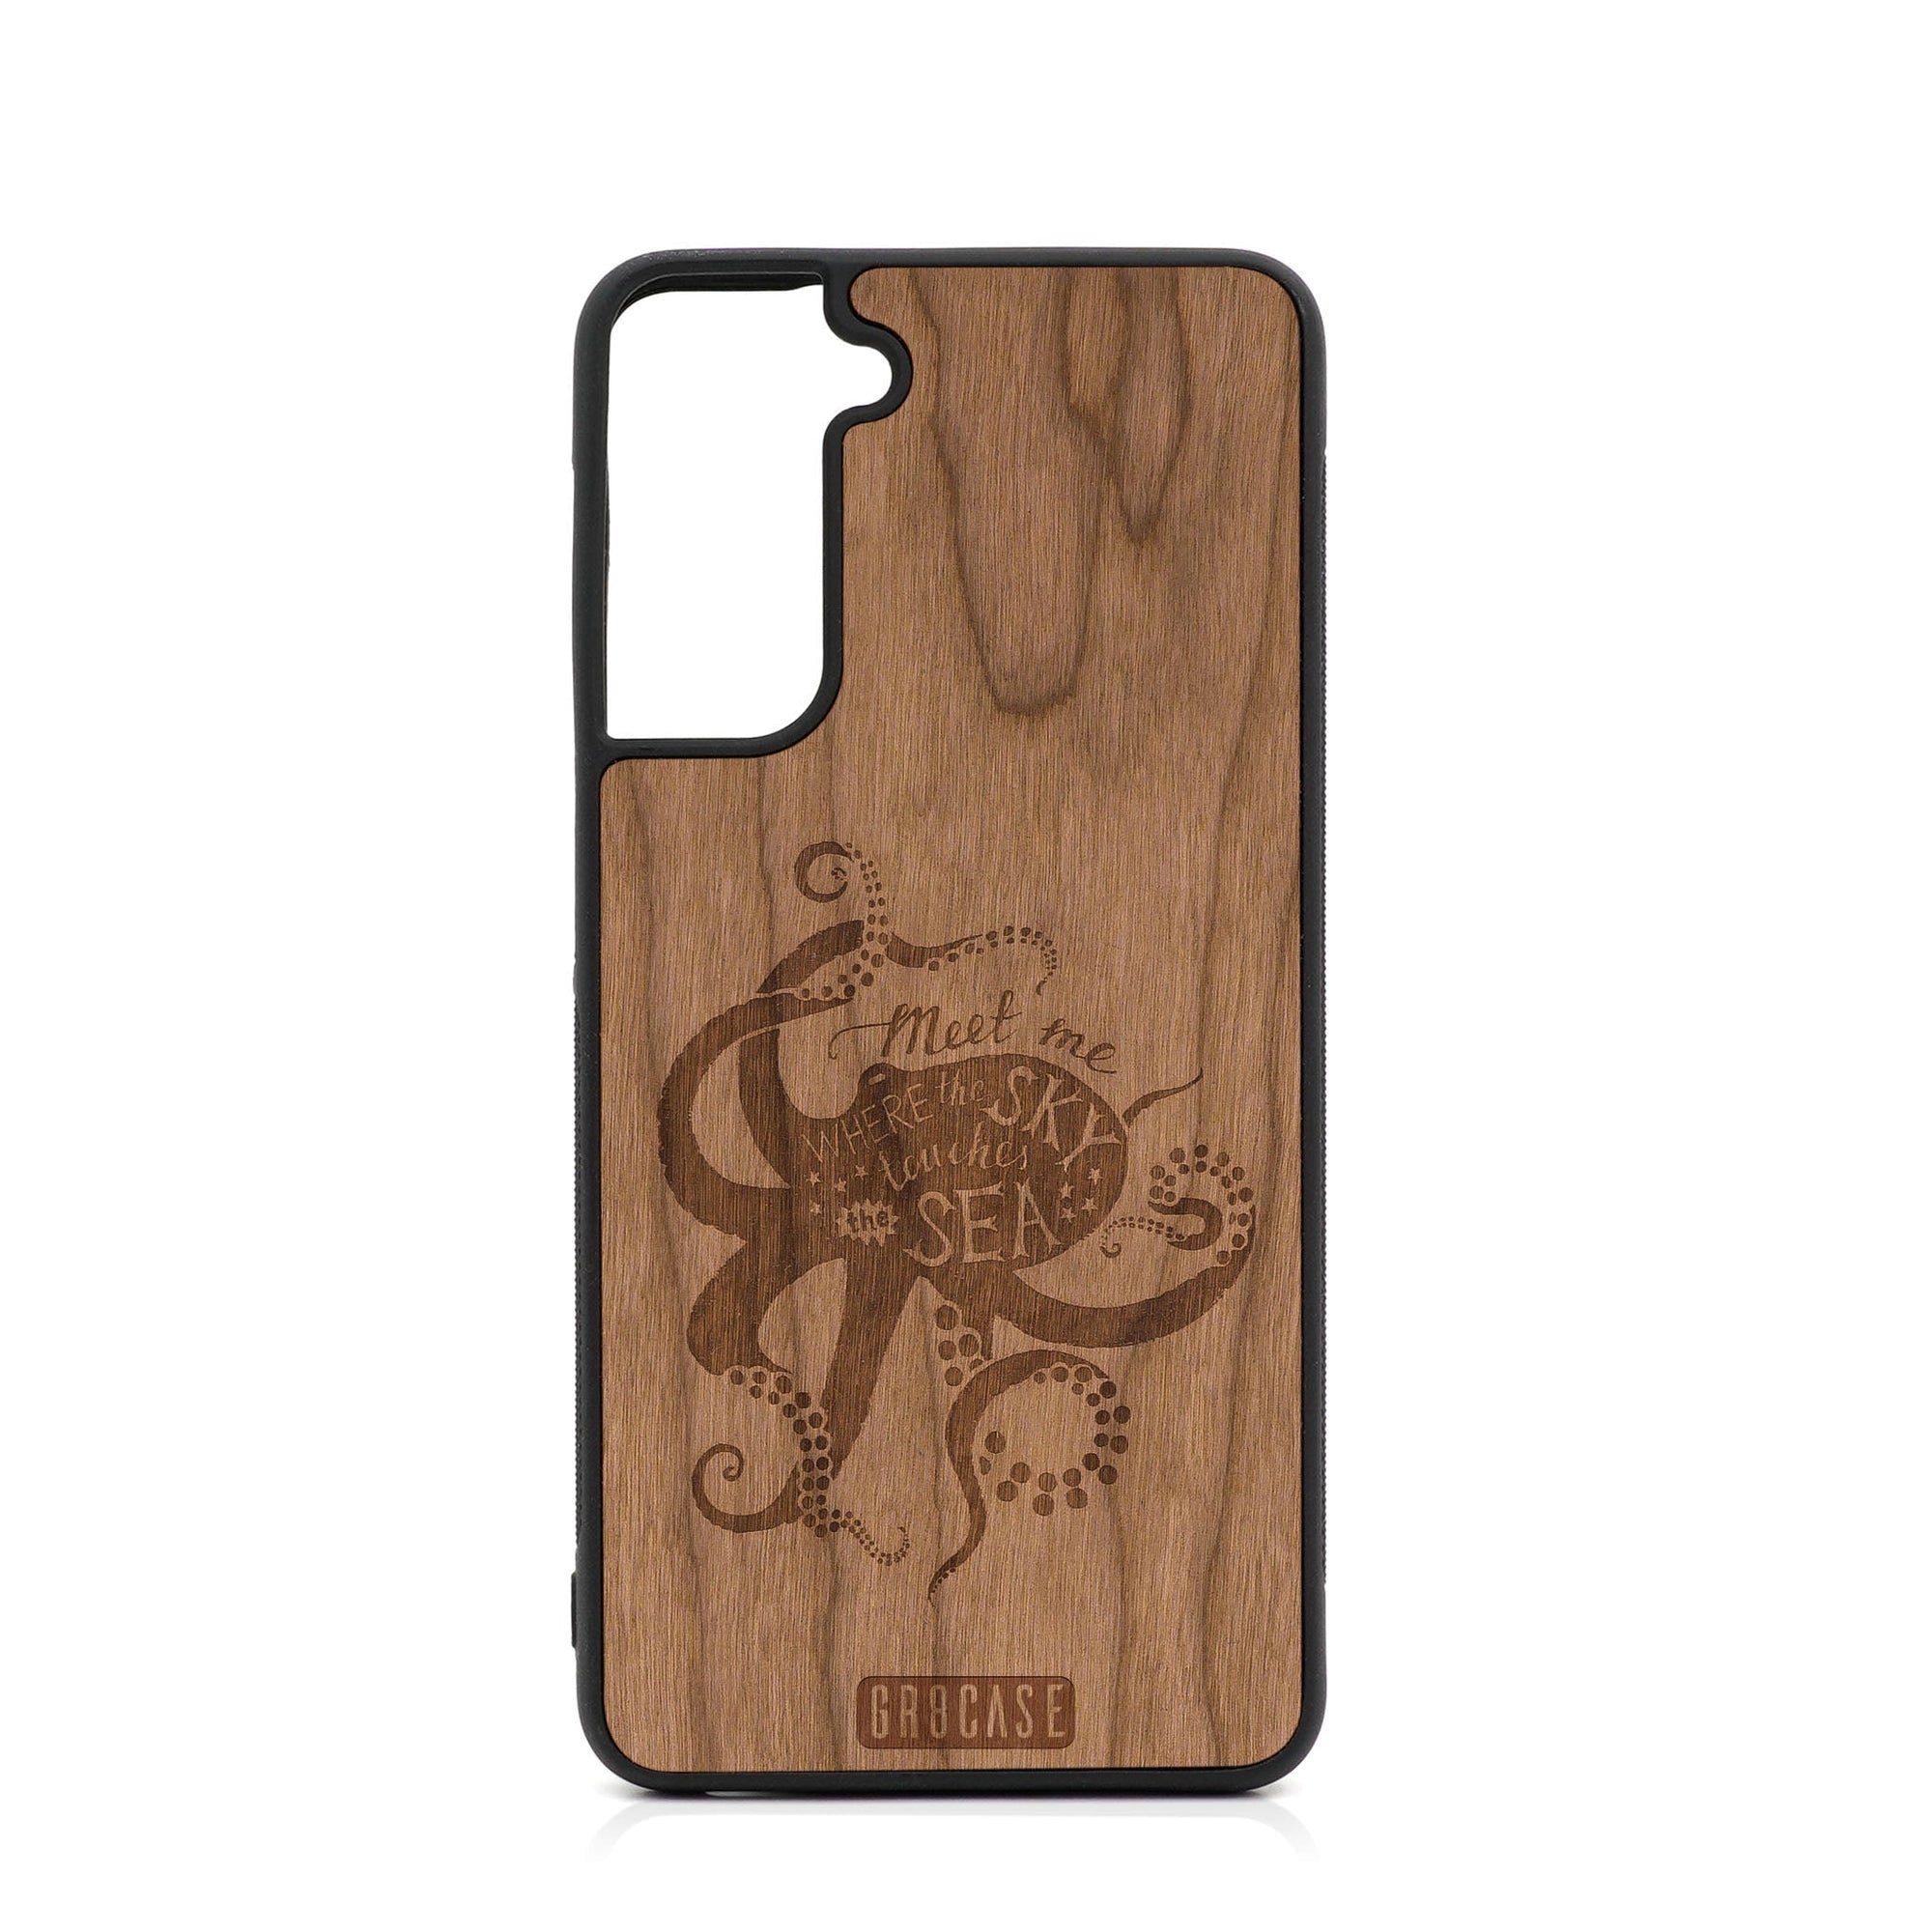 Meet Me Where The Sky Touches The Sea (Octopus) Design Wood Case For Samsung Galaxy S23 Plus